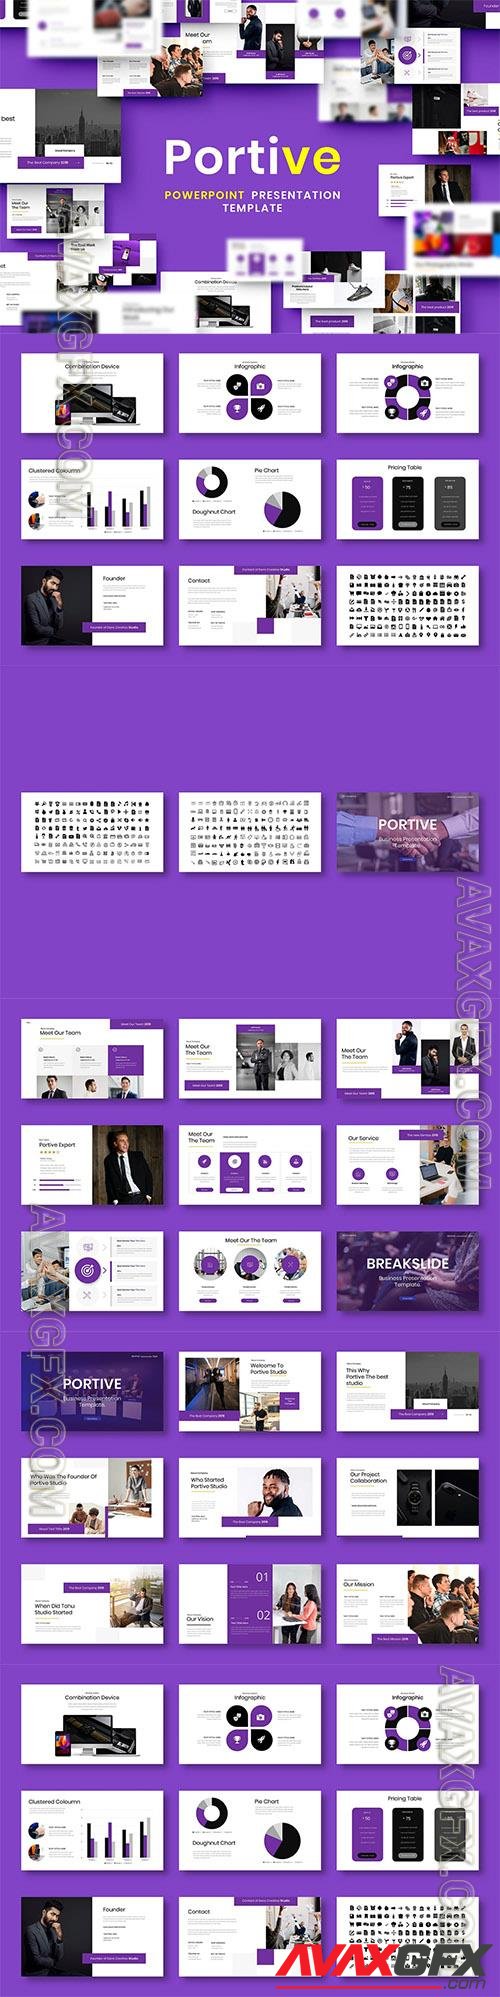 Portive – Business PowerPoint Template MDAVF5F